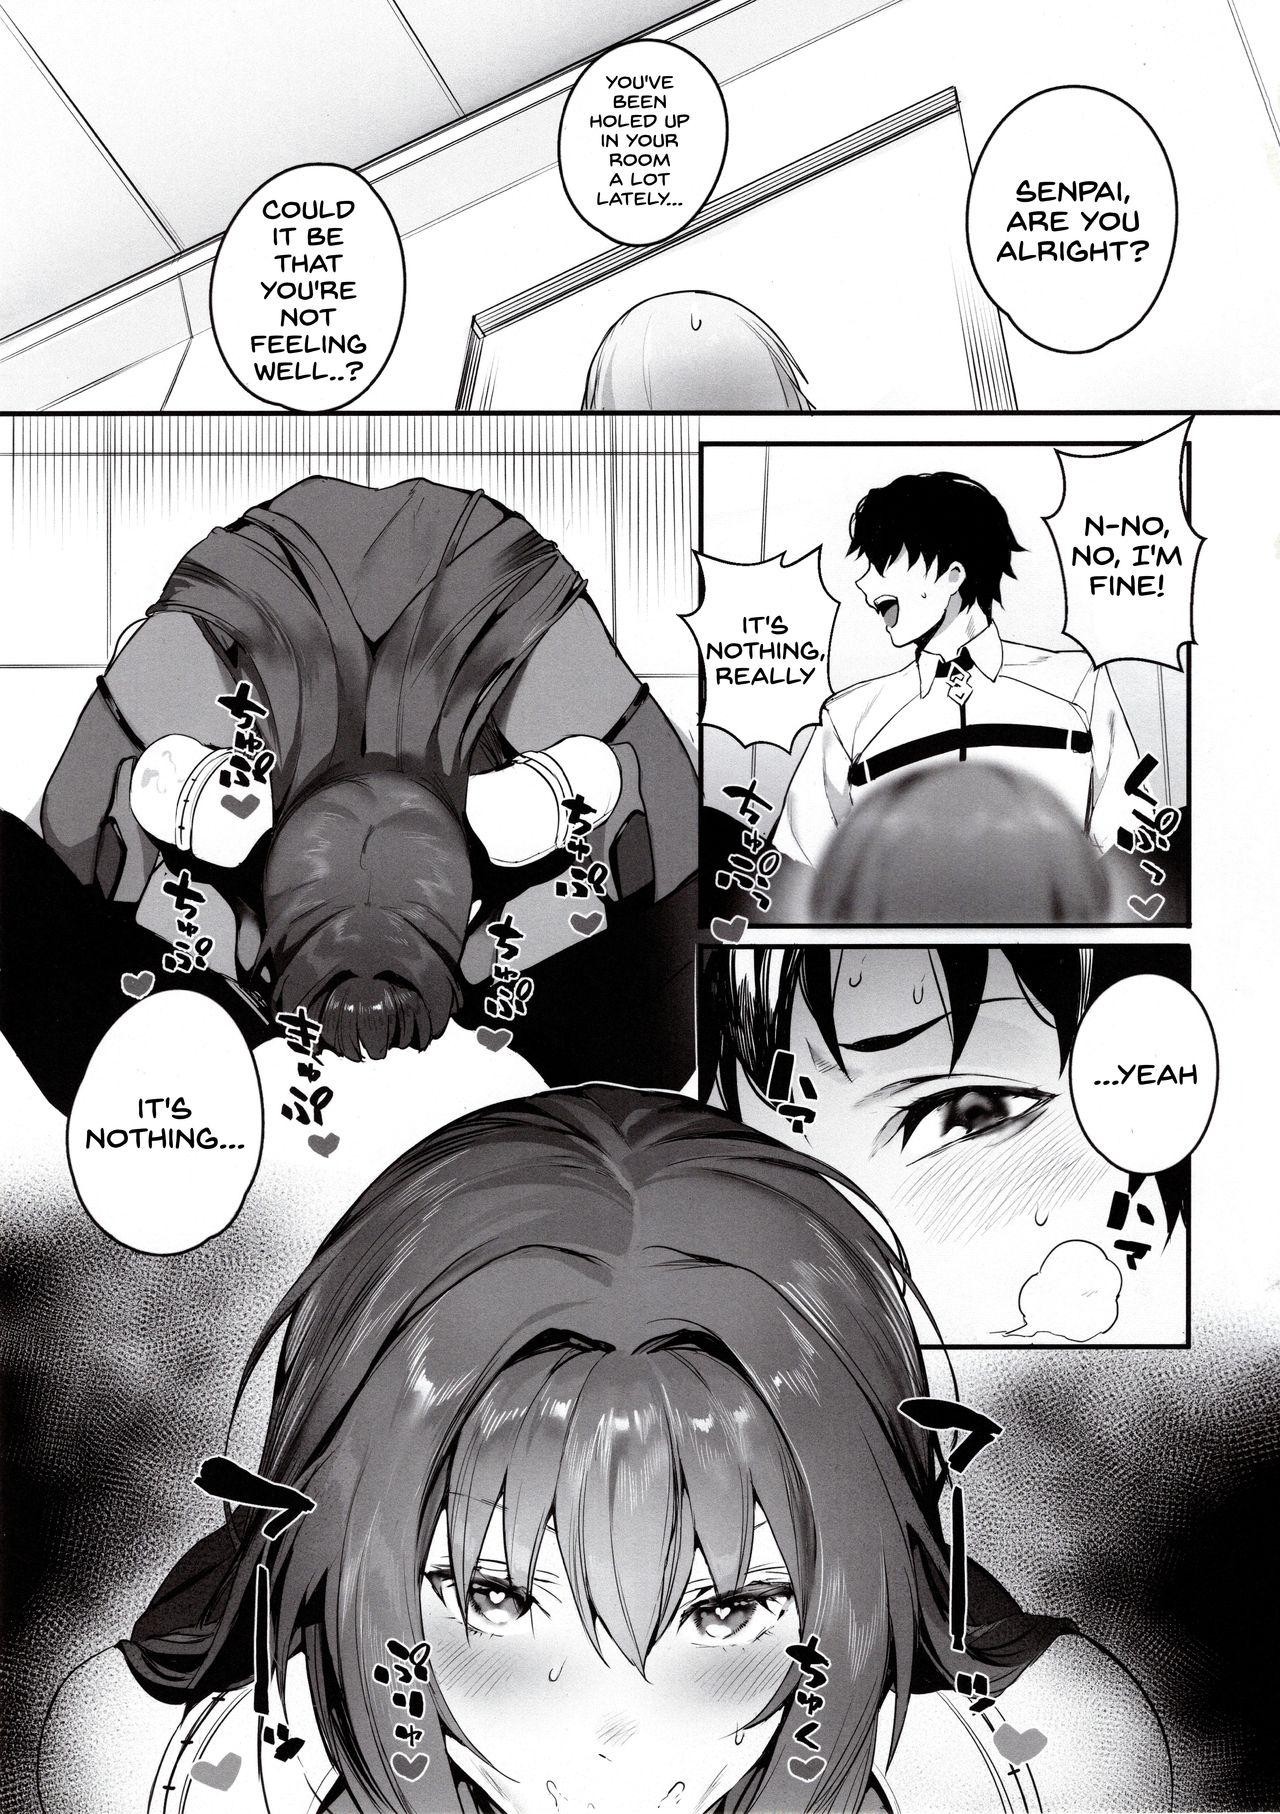 Novia MOVE ON UP - Fate grand order Wank - Page 2